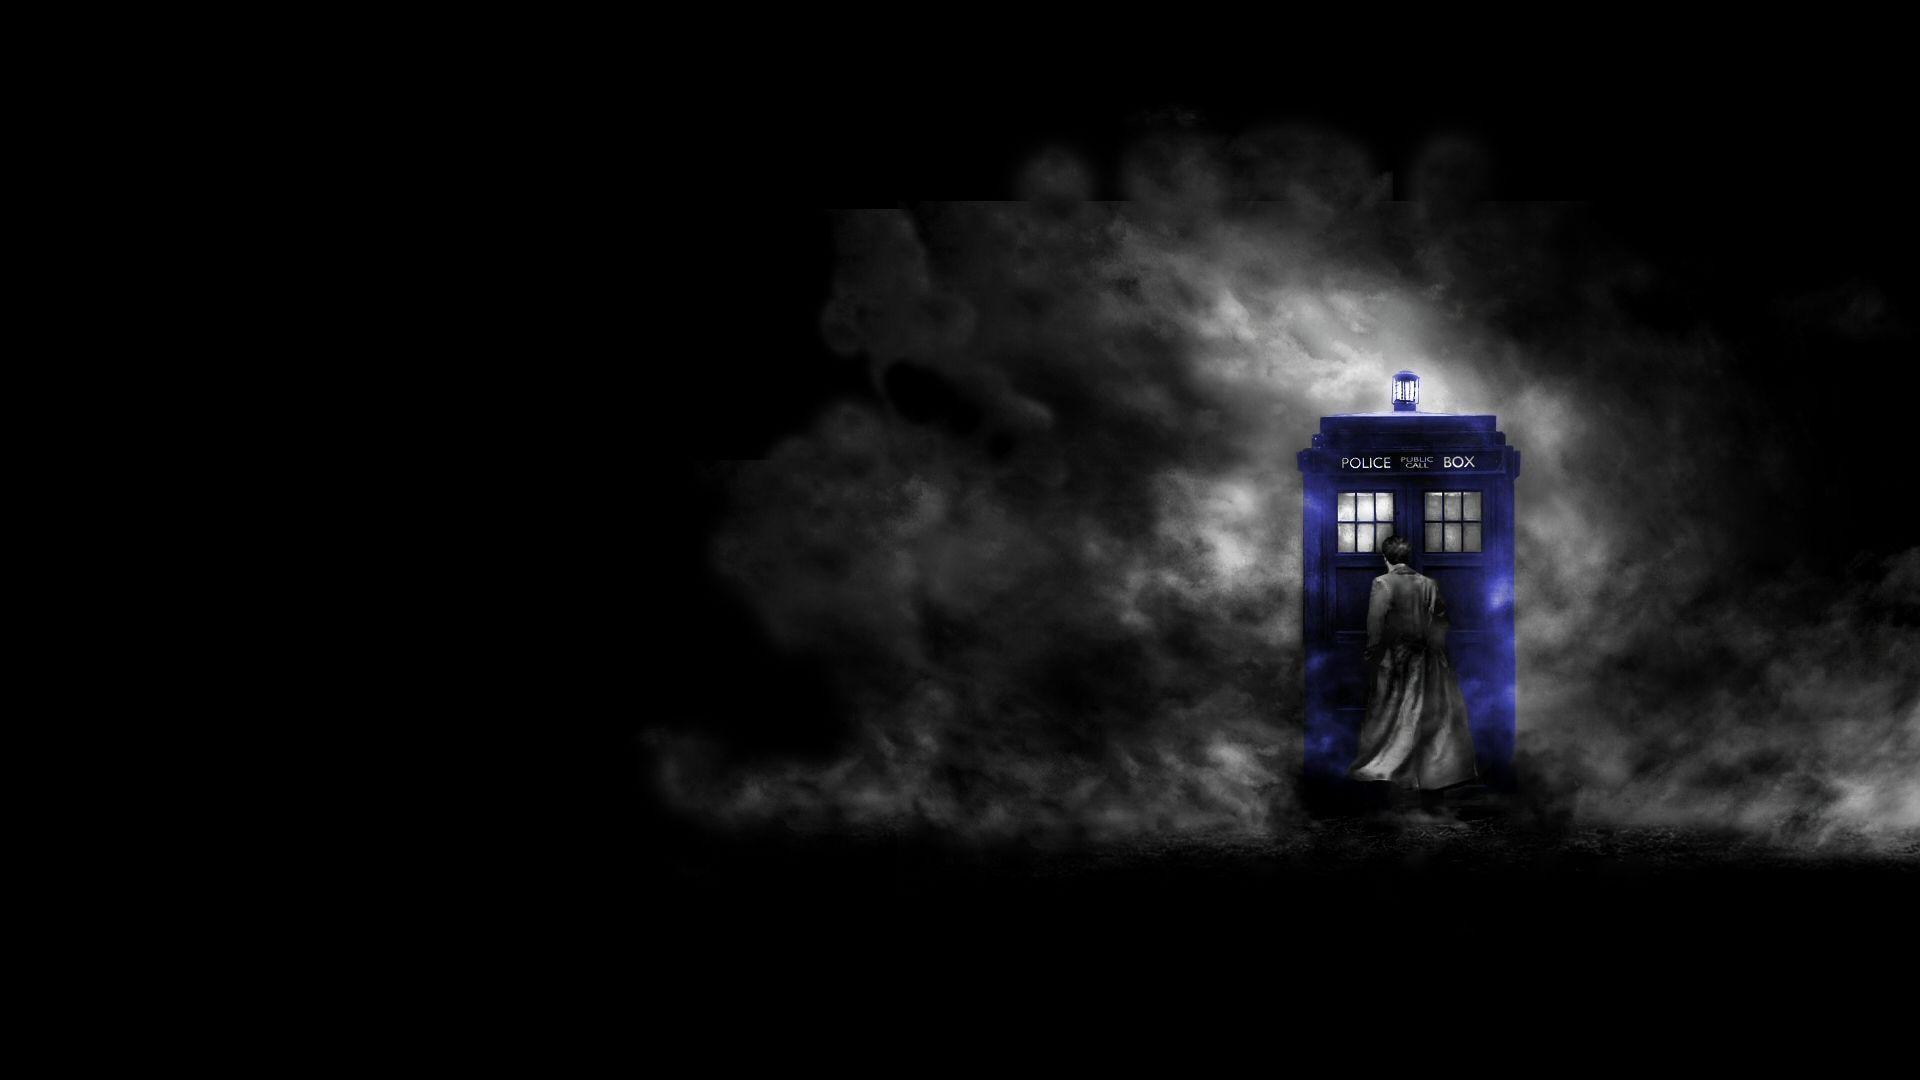 Doctor Who Phone Wallpaper